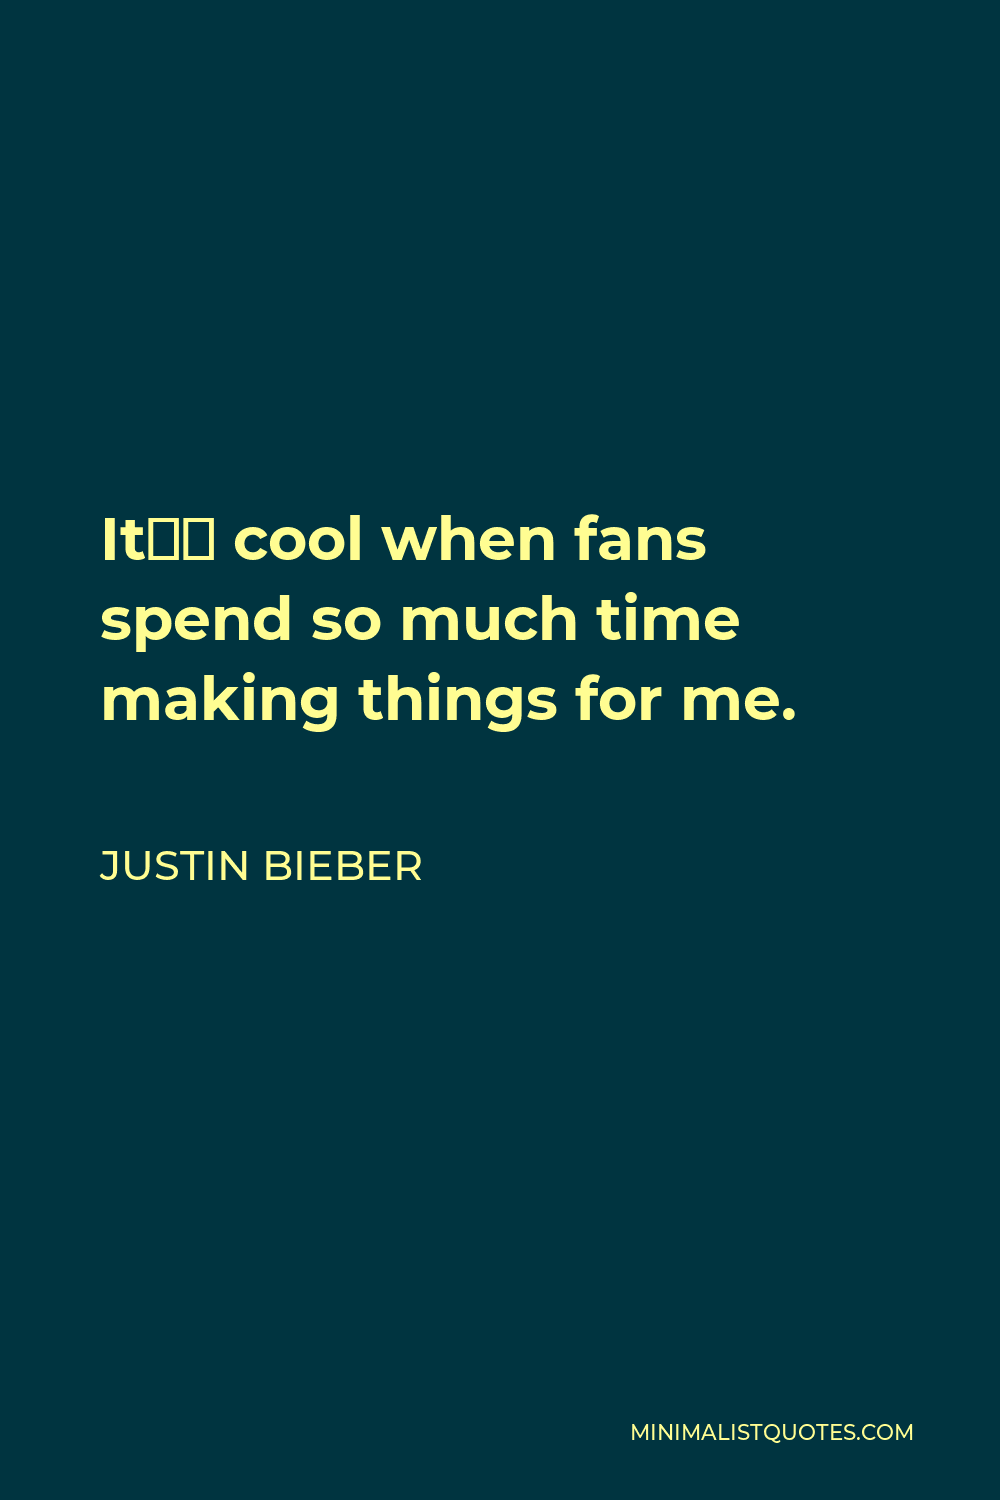 Justin Bieber Quote - It’s cool when fans spend so much time making things for me.